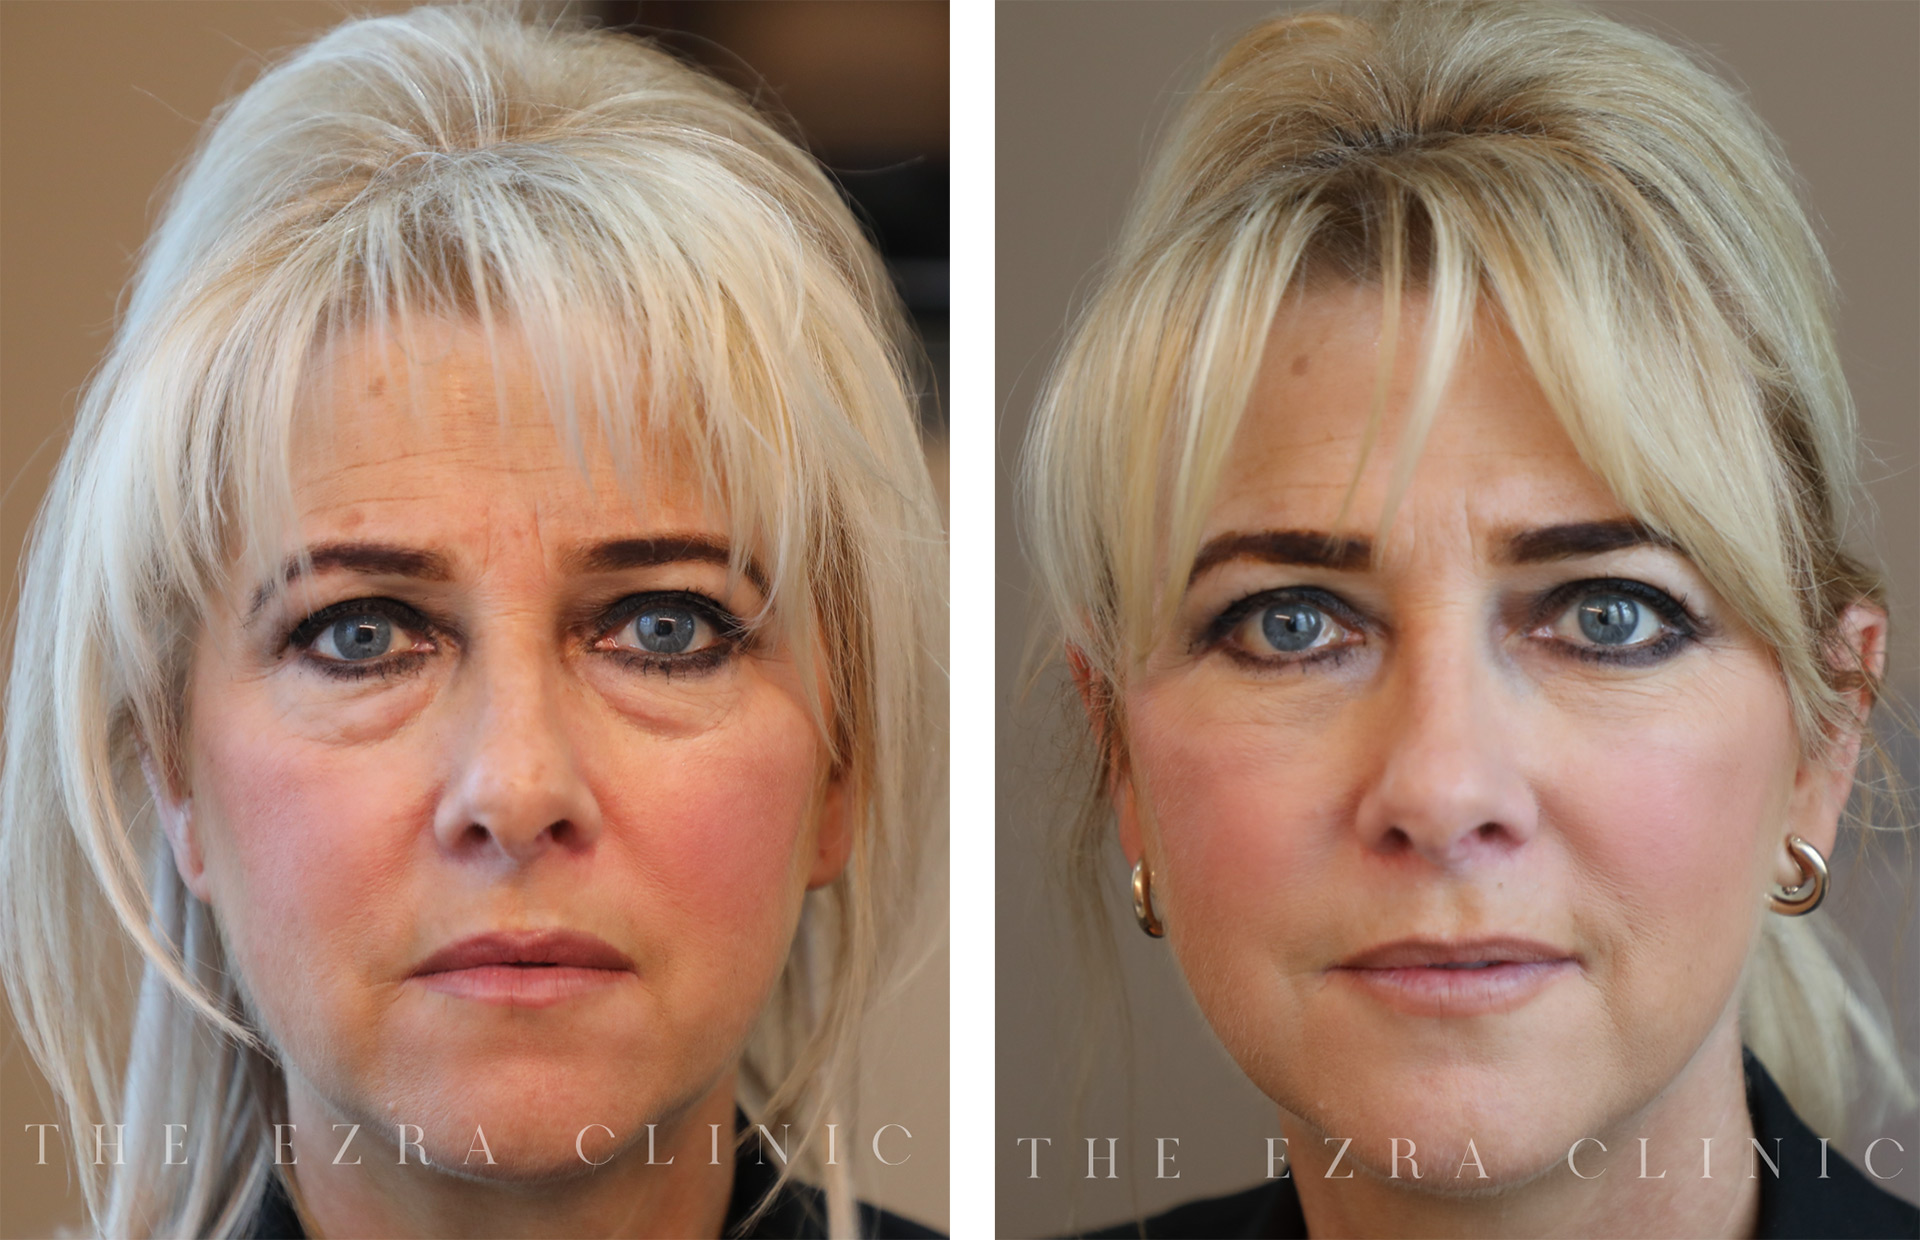 Before and After Eyelid Treatment by a UK Eyelid Surgeon